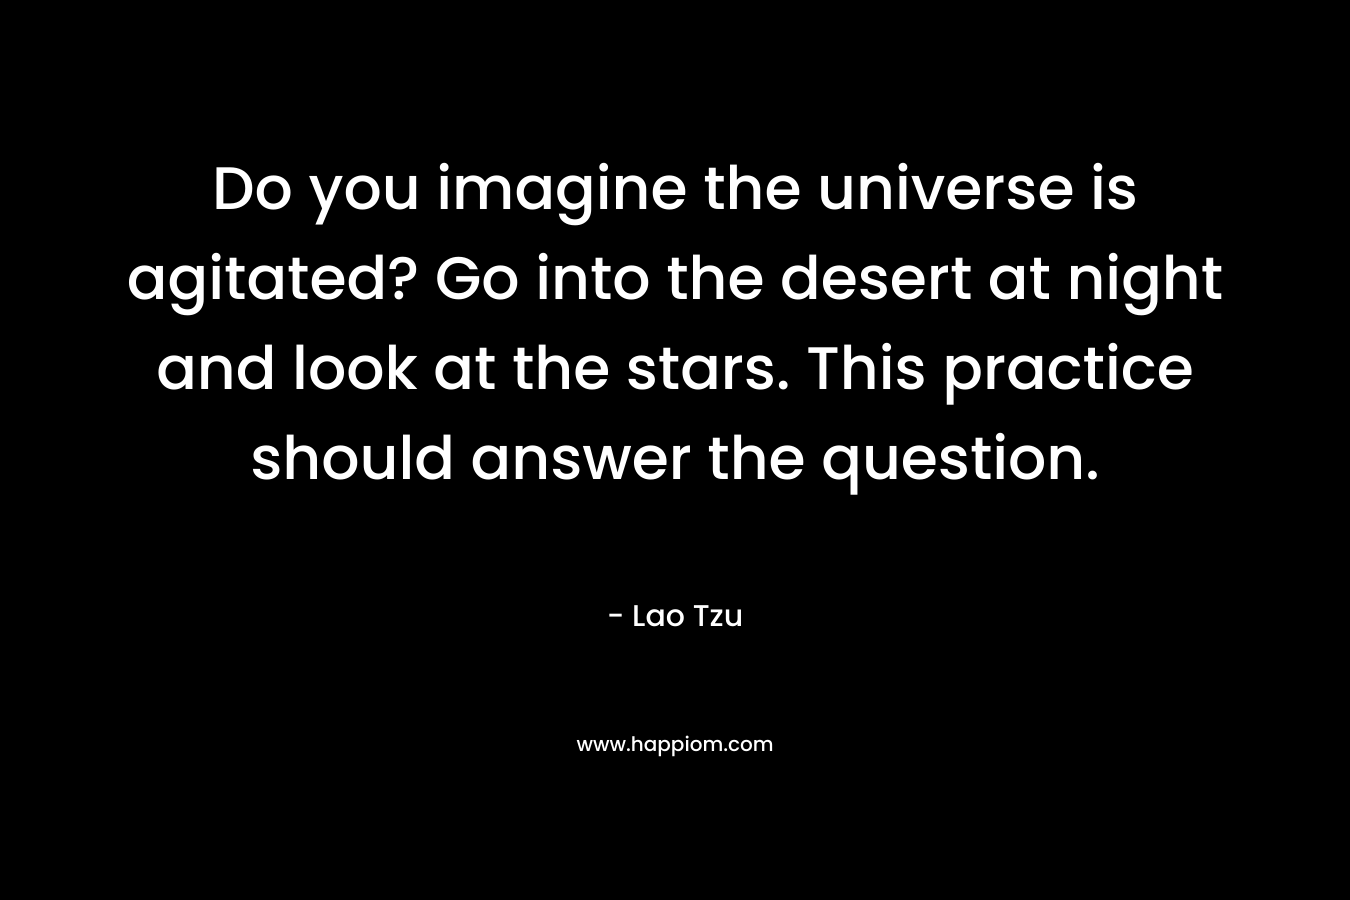 Do you imagine the universe is agitated? Go into the desert at night and look at the stars. This practice should answer the question.